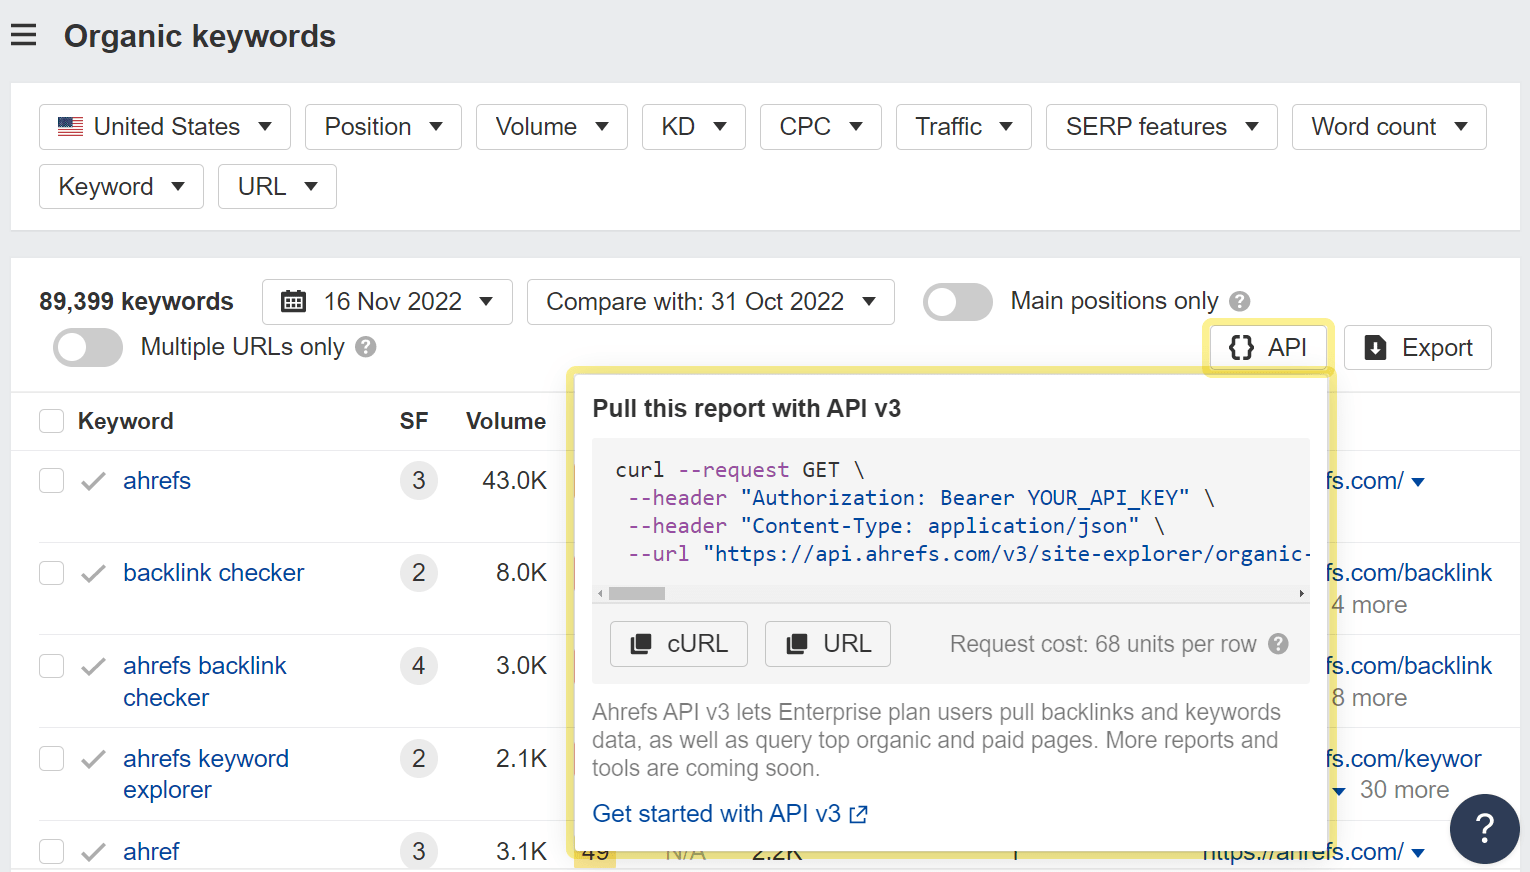 By clicking the API button you get the full curl response needed for an API request